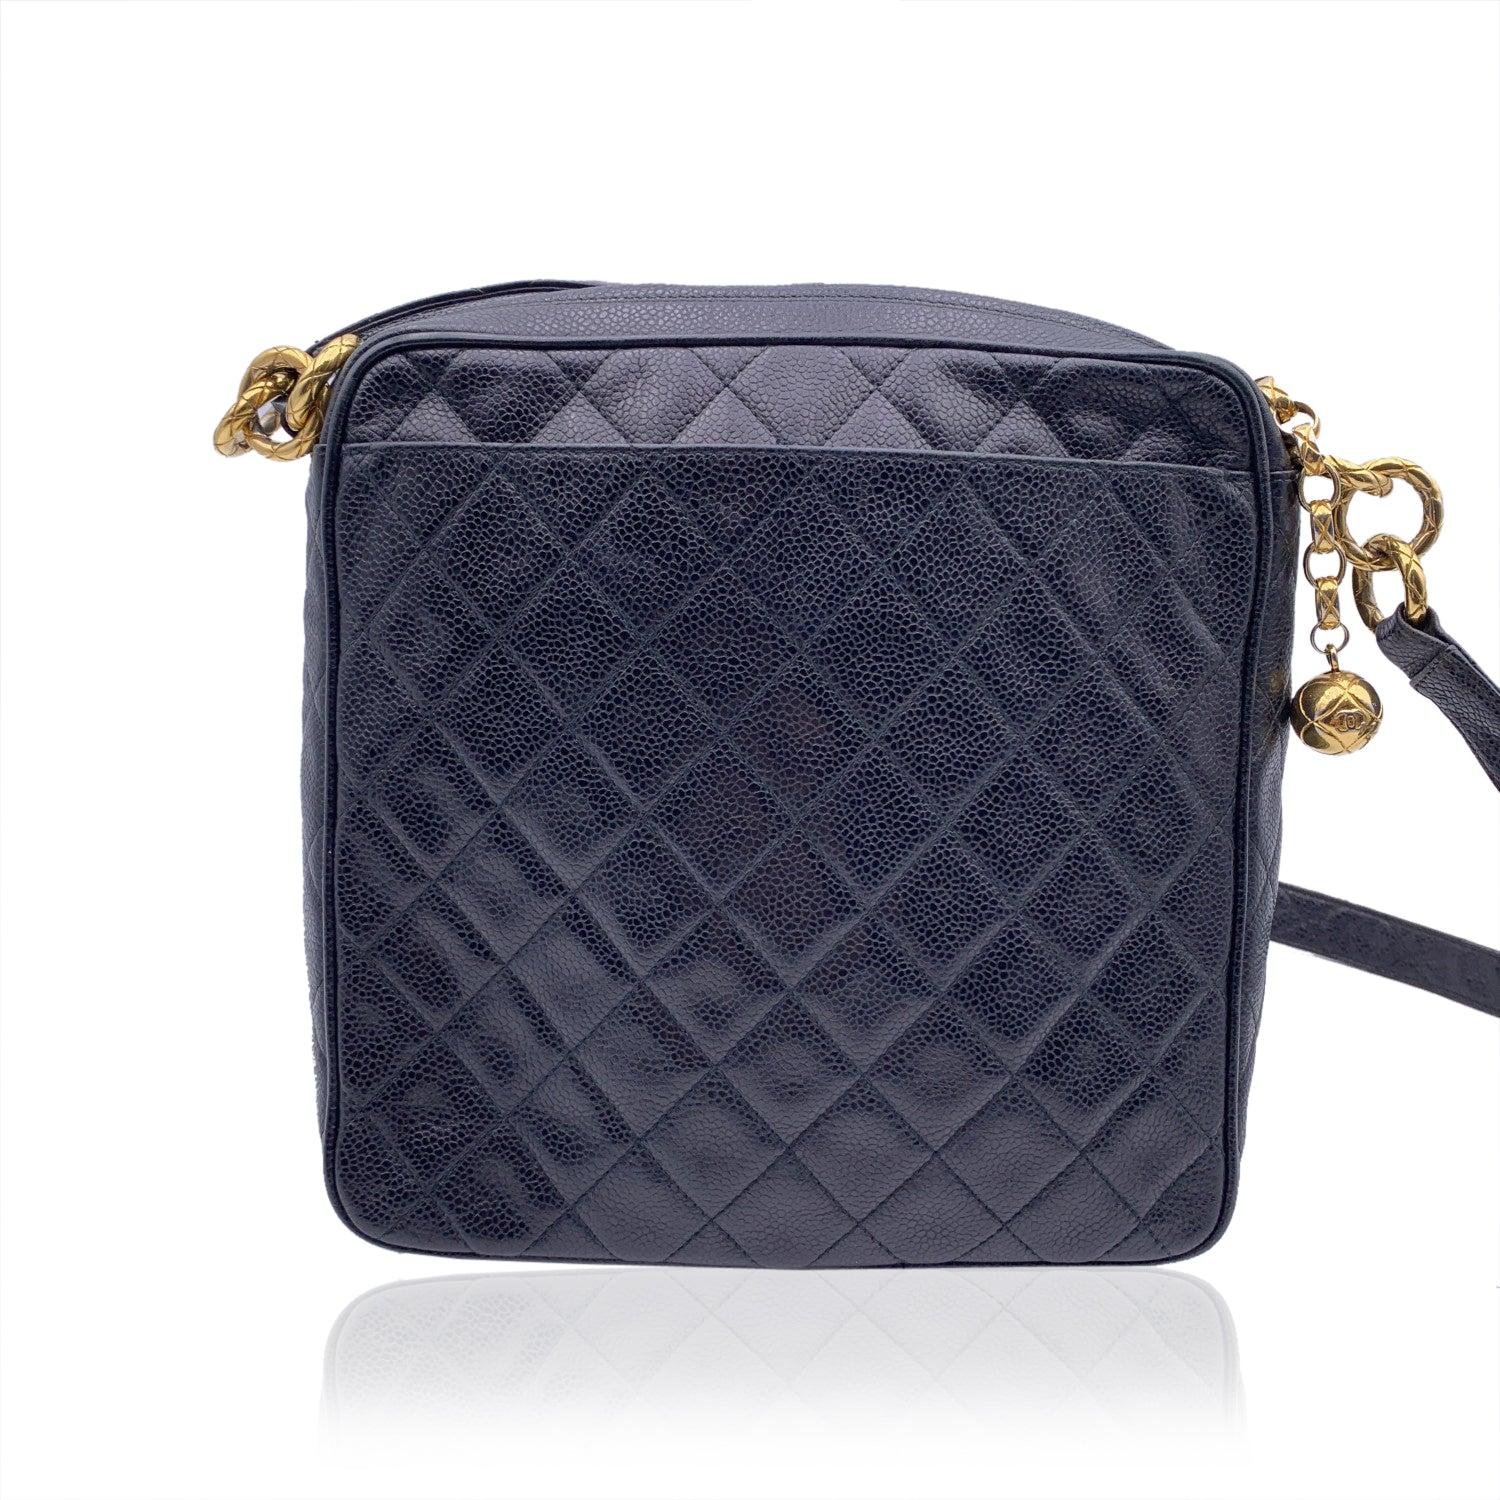 Vintage rare Chanel quilted crossbody bag, crafted in black caviar leather. Gold metal hardware. From the 1994. It features a front flap pocket with CC - CHANEL logo turnlock closure and a rear open pocket. 1 main compartment wit upper zipper